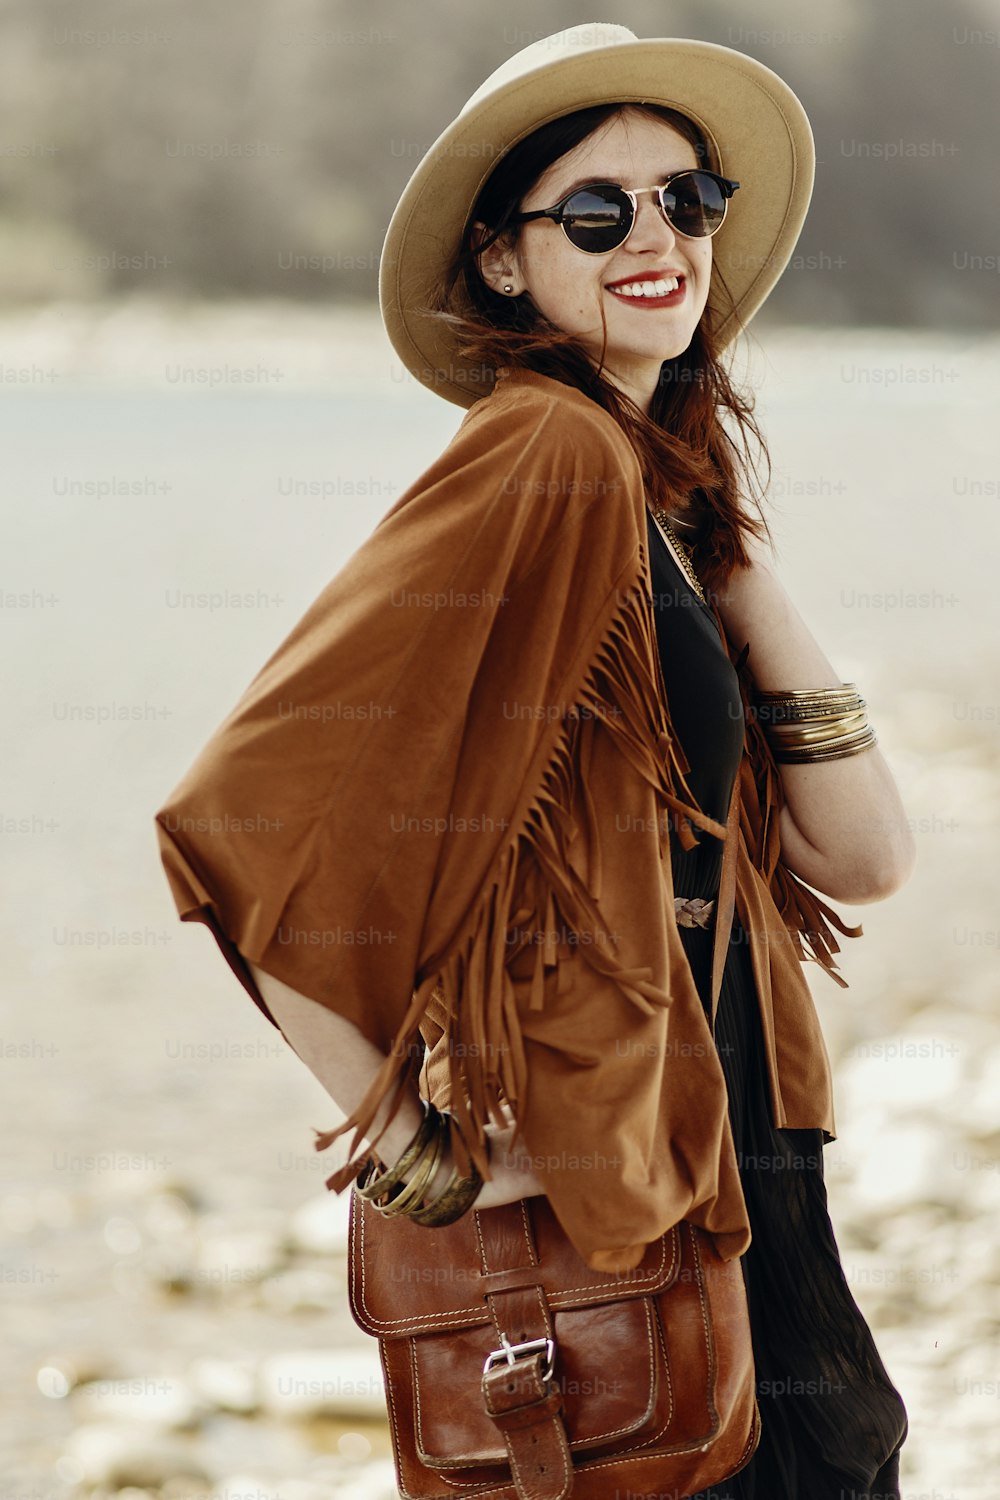 stylish hipster boho woman smiling in sunglasses with hat, leather bag, fringe poncho and accessory. happy traveler girl look, near beach in mountains. wanderlust summer travel.